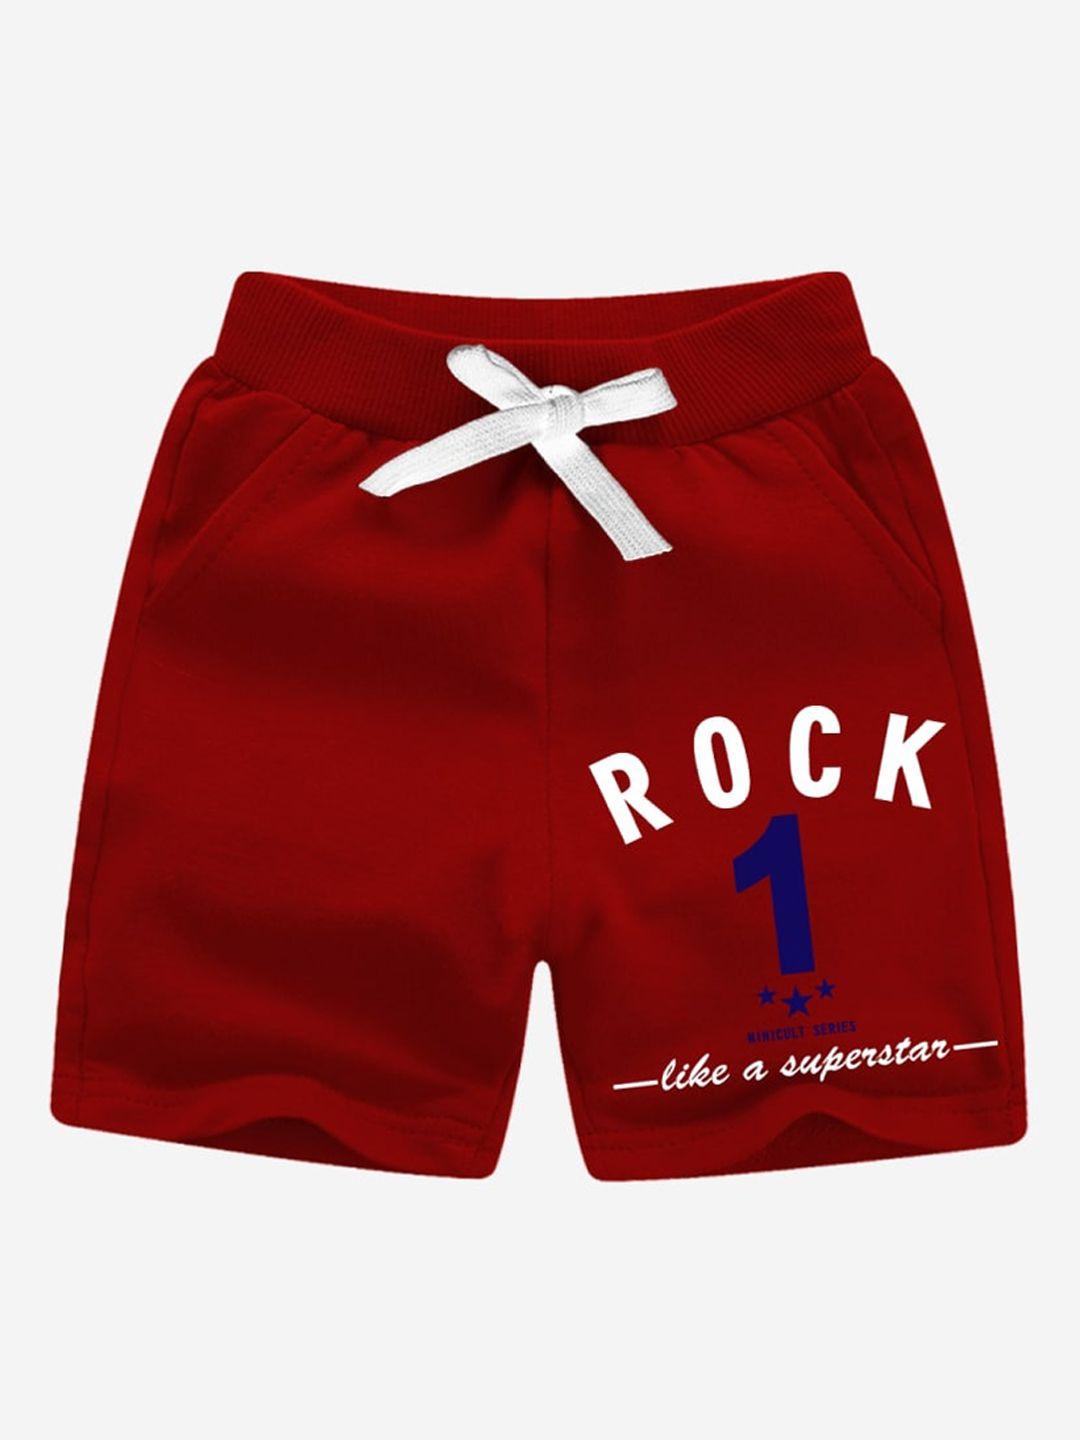 x2o boys red printed outdoor shorts